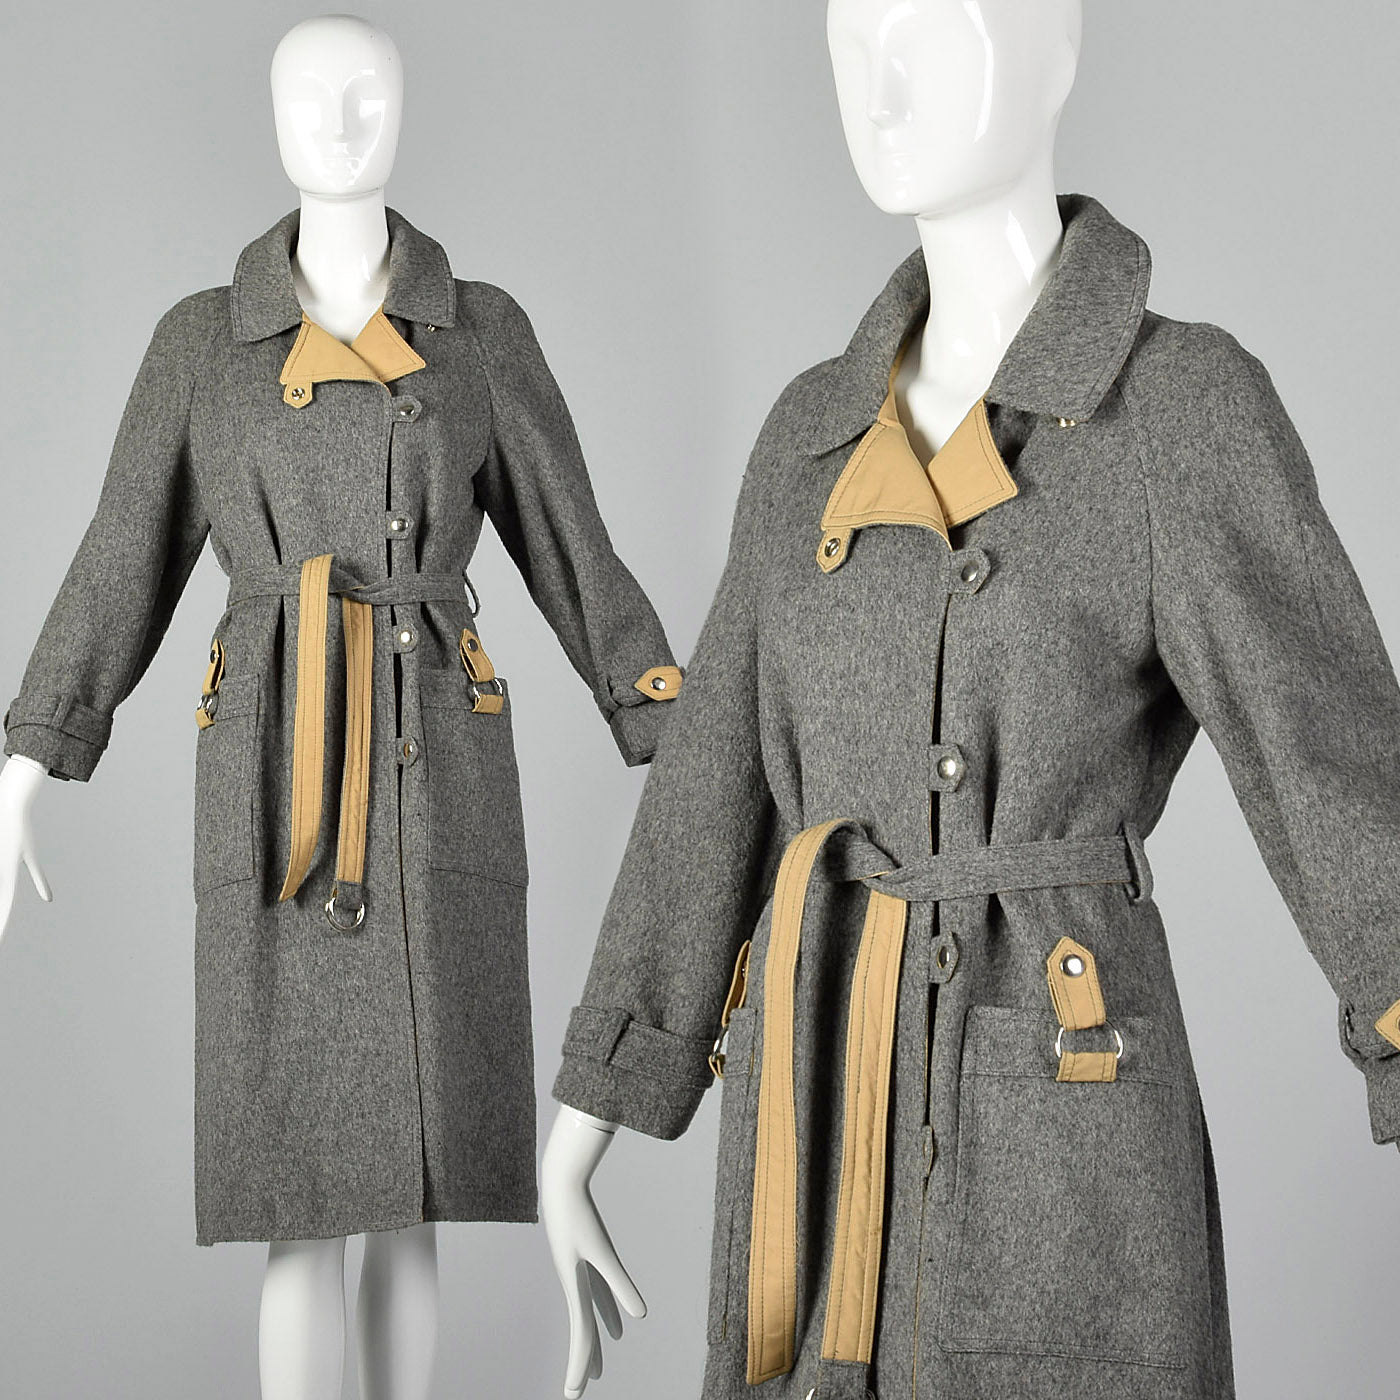 1970s Wool and Canvas Trench Coat with Snap Closures